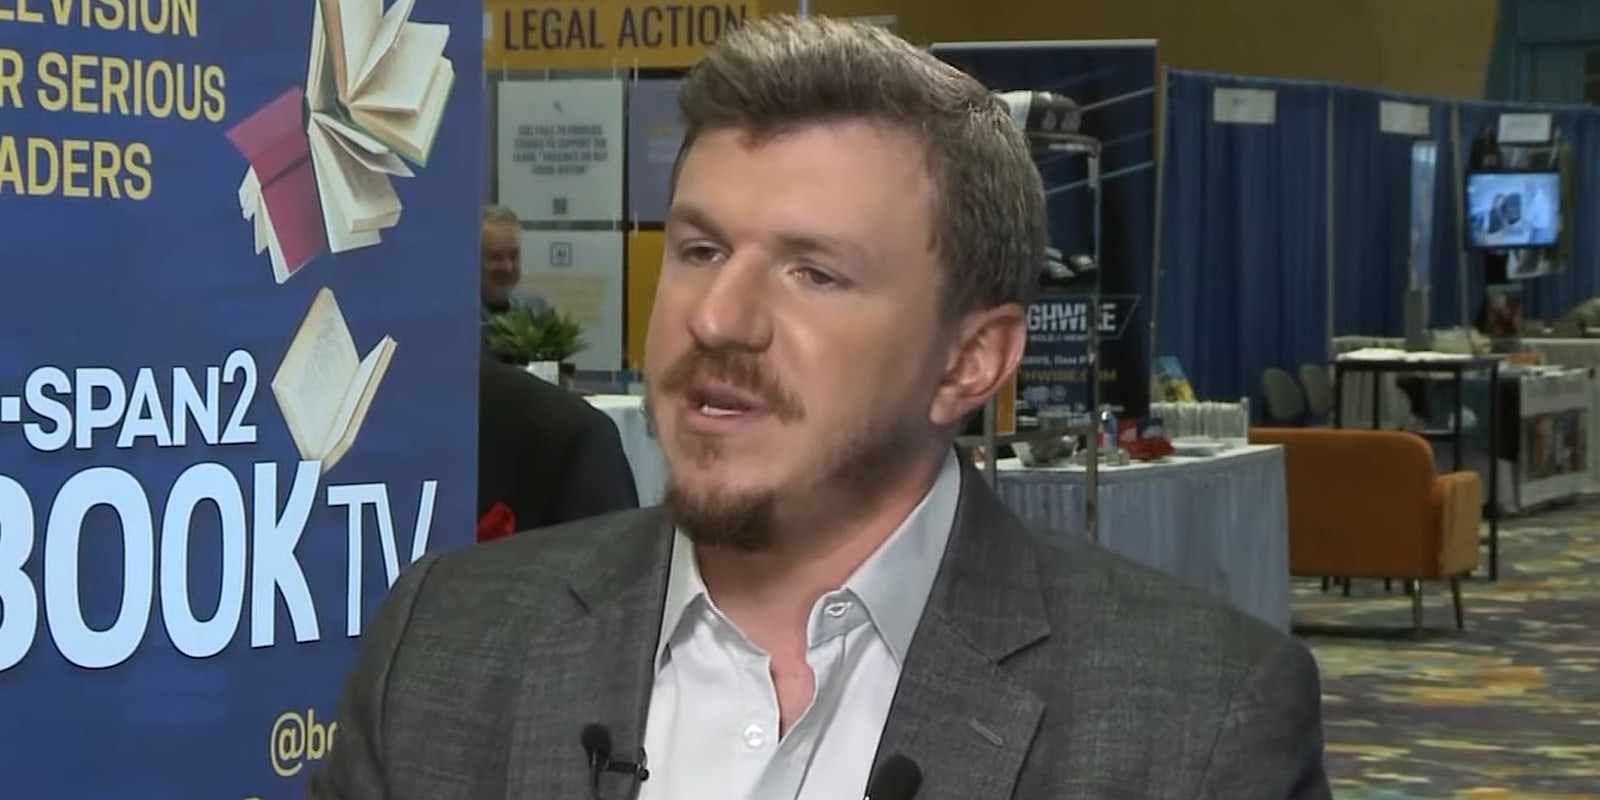 James O'Keefe speaking at libertarian conference